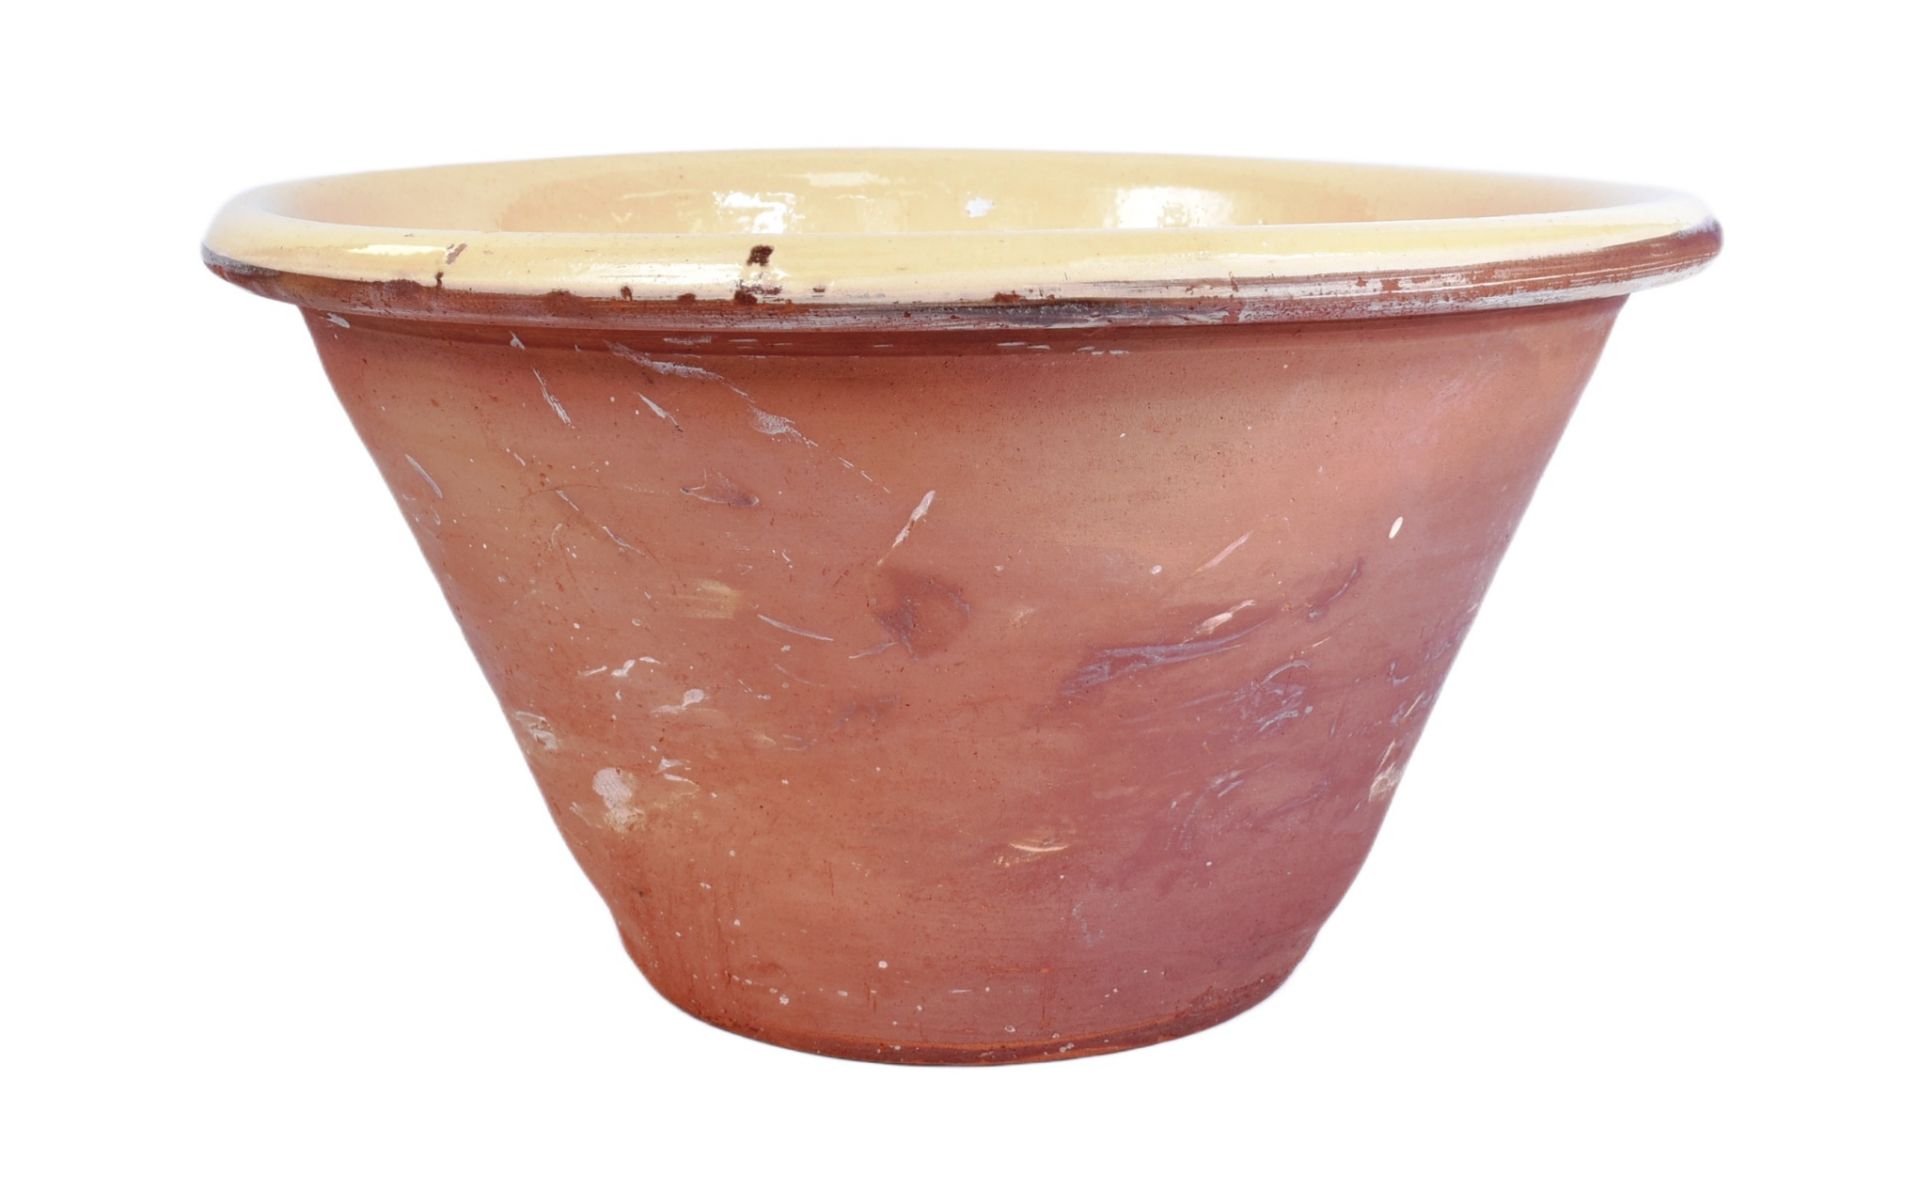 EARLY 20TH CENTURY LARGE EARTHENWARE DAIRY BOWL